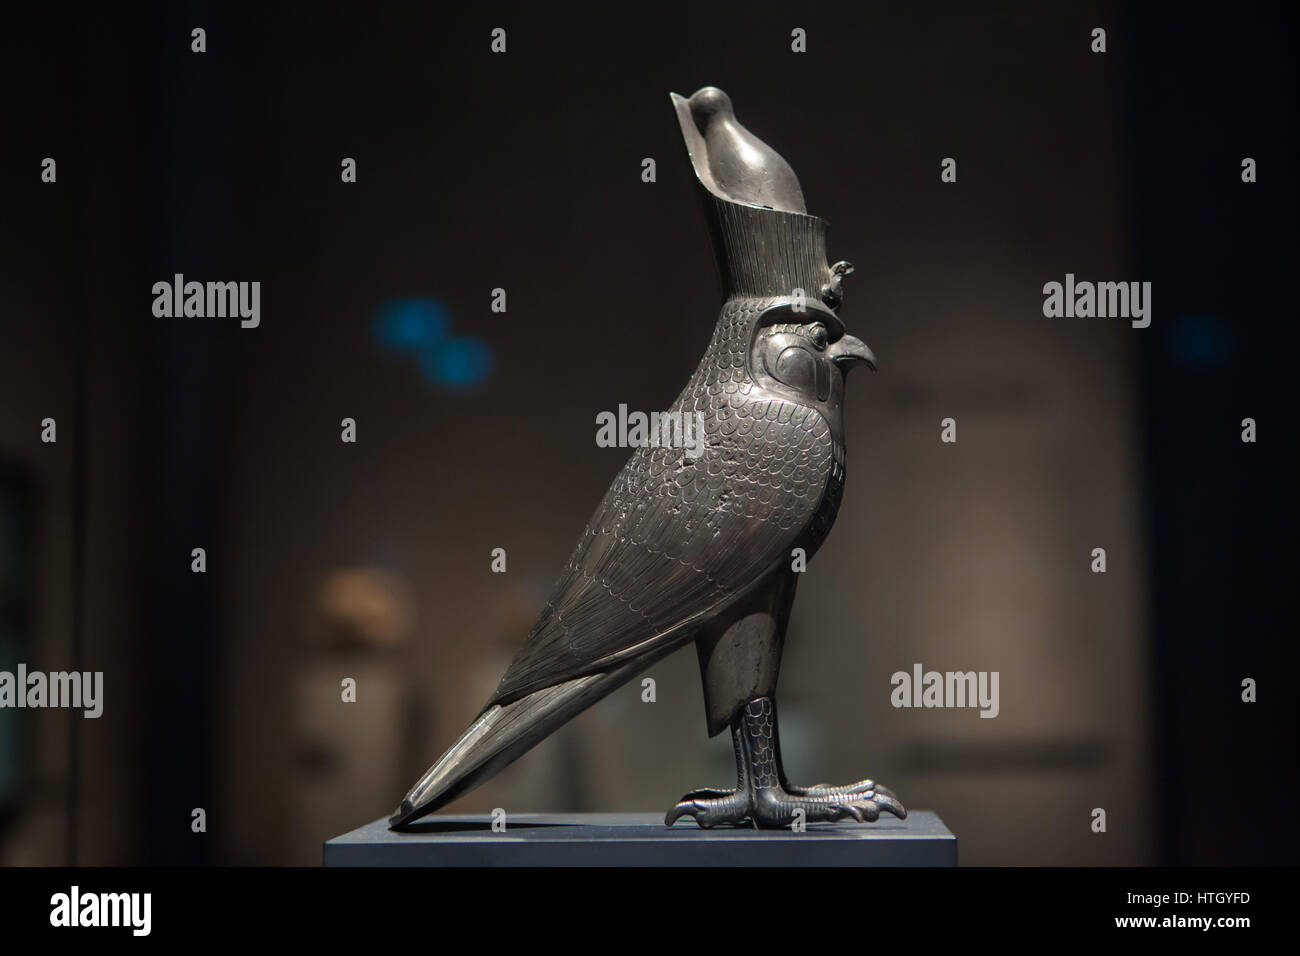 God Horus as Falcon wearing the Double Crown of Egypt. Silver statuette from about 500 BC, 27th Dynasty, Late Period of Ancient Egypt, on display in the Staatliches Museum Agyptischer Kunst (State Museum of Egyptian Art) in Munich, Bavaria, Germany. Stock Photo